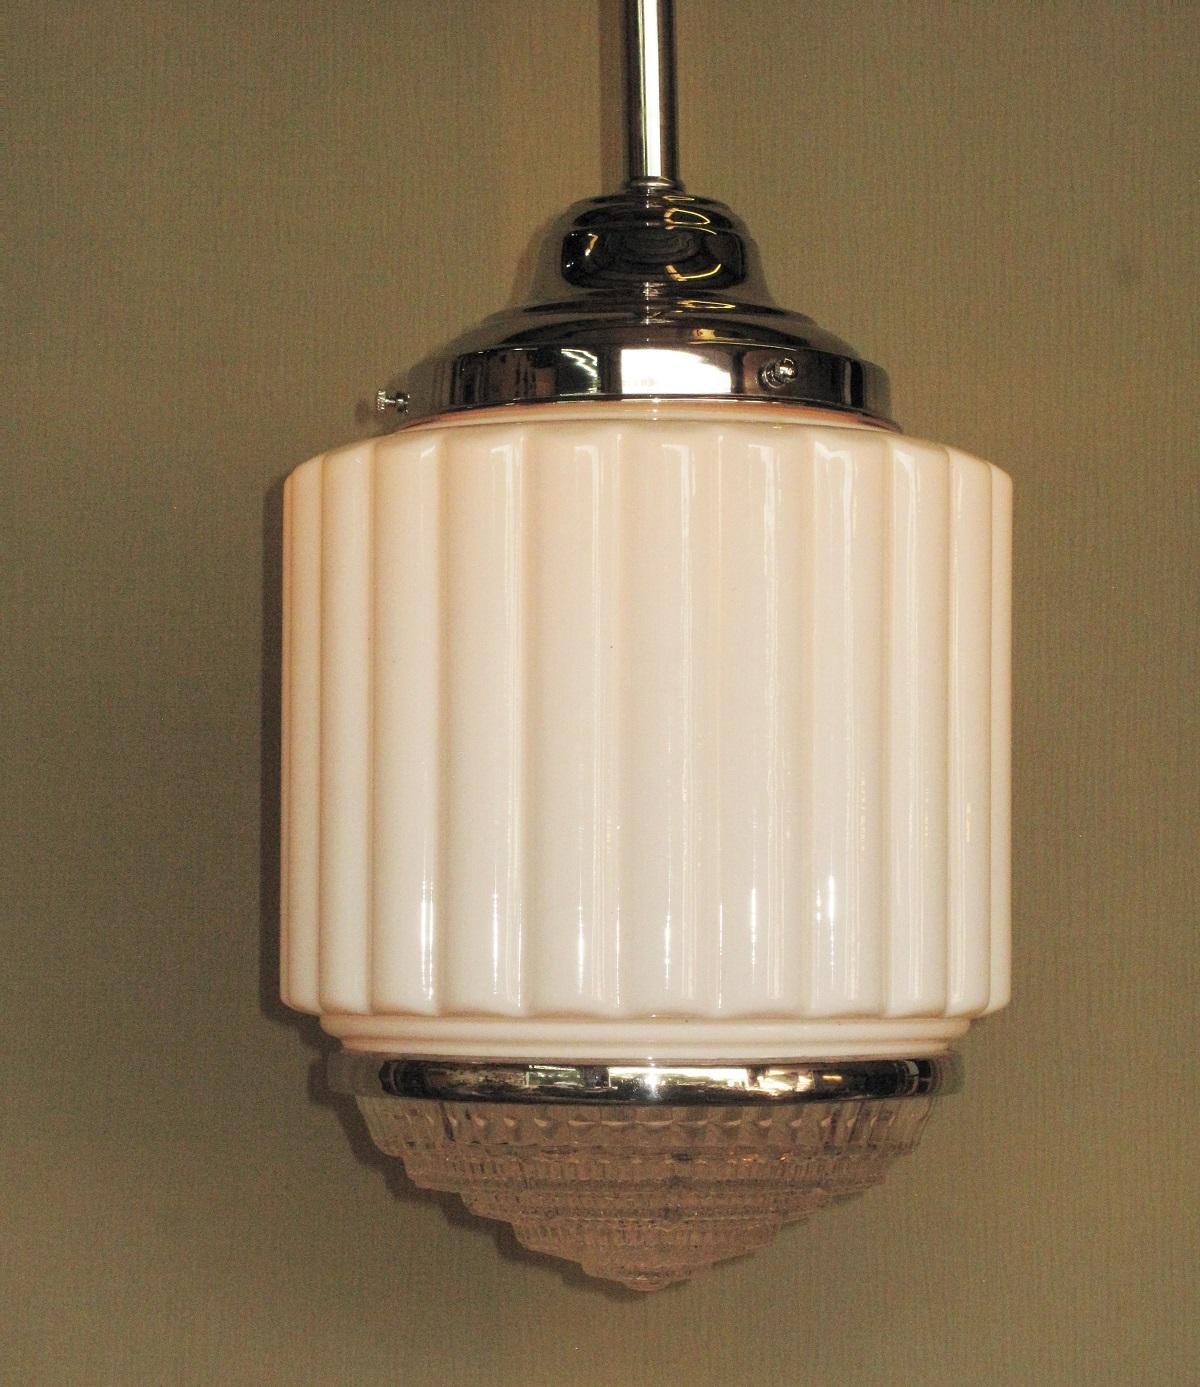 7 matching available, priced each.
Out of a historic property in San Diego's gas lamp district. Classic look with the milk glass portion a series of column ribs, the stepped clear bottom crystal has a series of ribs to help disperse the light.